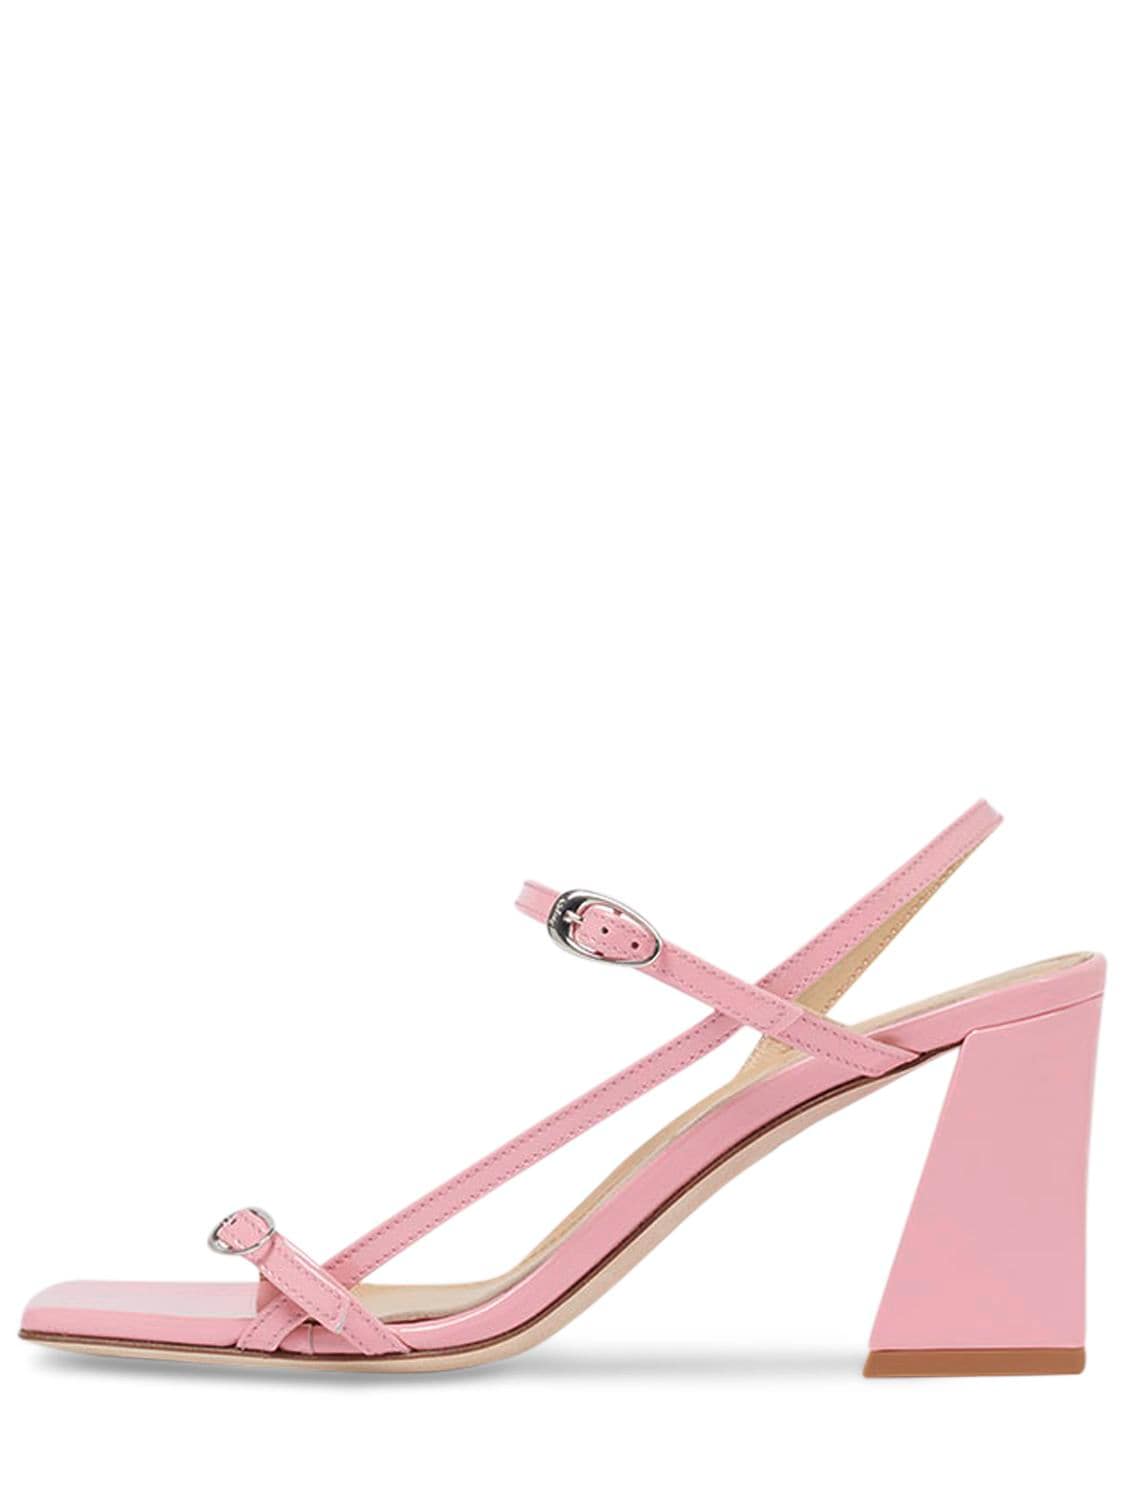 Aeyde 75mm Hilda Patent Leather Sandals In Pink